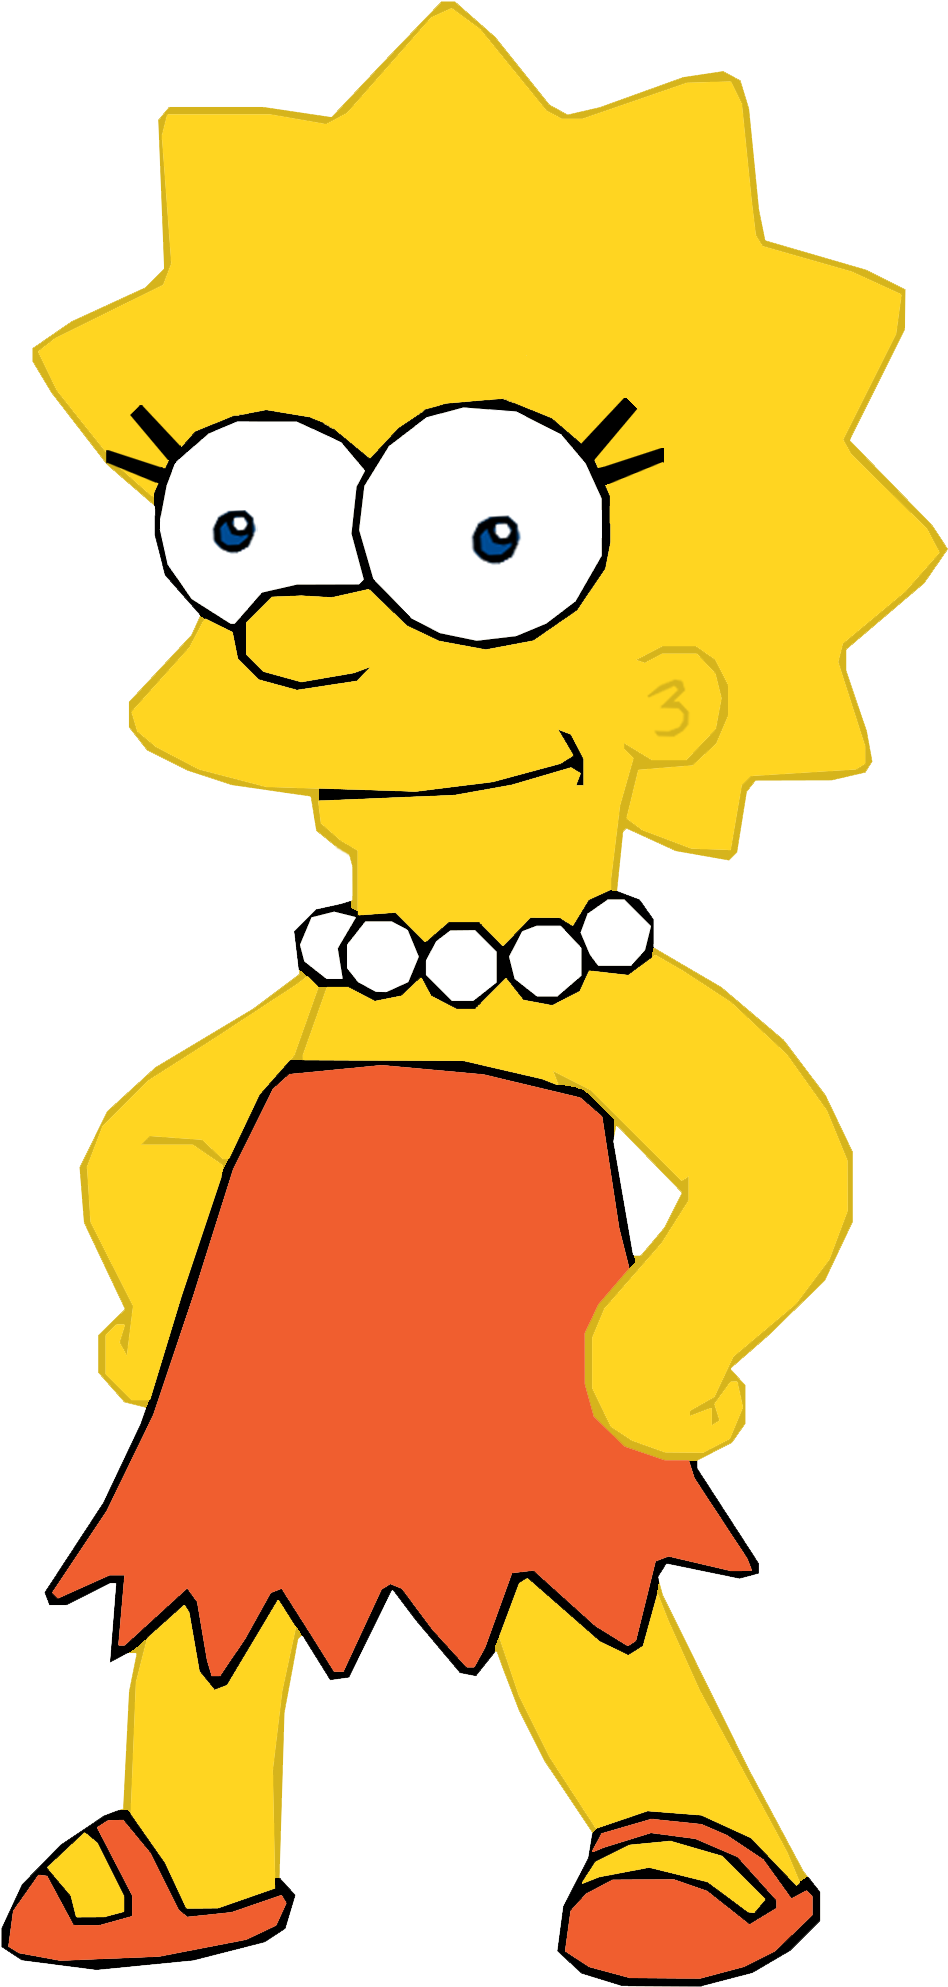 Lisa Simpson In Pnf/milo Murphy's Law Style - Chris Griffin Lisa Simpson (1475x2400)